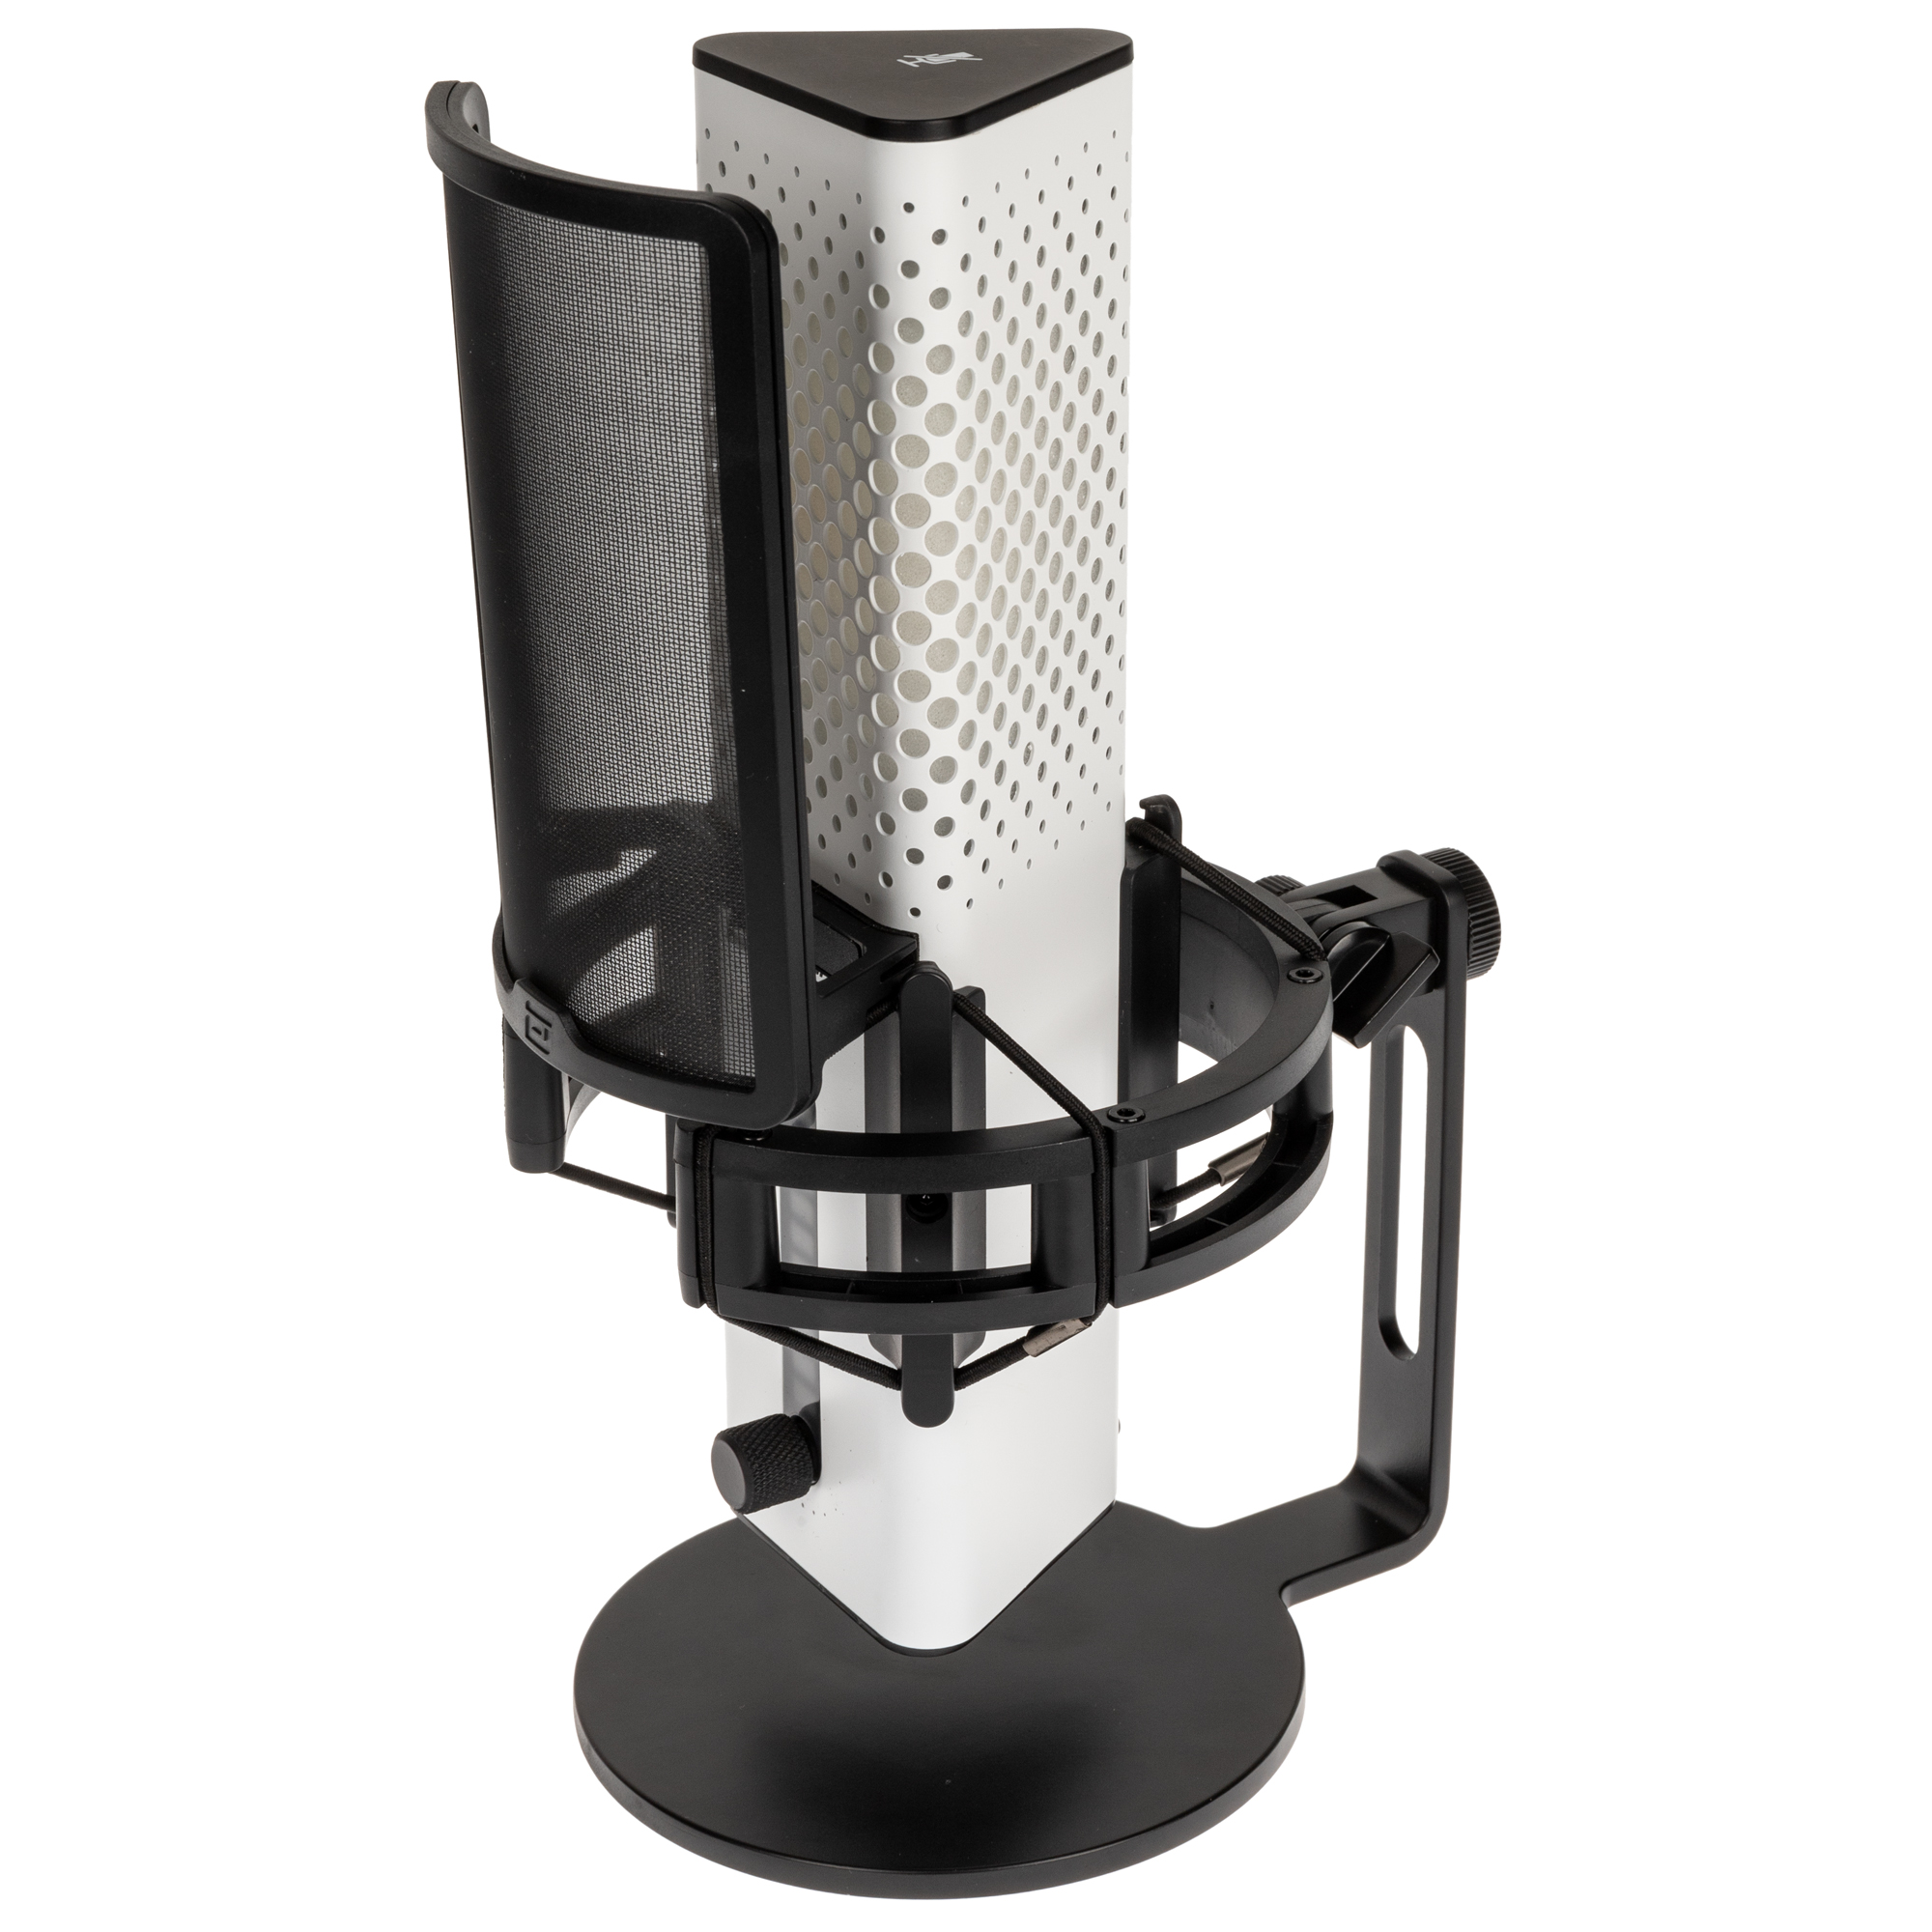 Endgame Gear - Endgame Gear XSTRM RGB USB Microphone with Shock Mount and Pop Filter - White (EGG-XST-WHT)